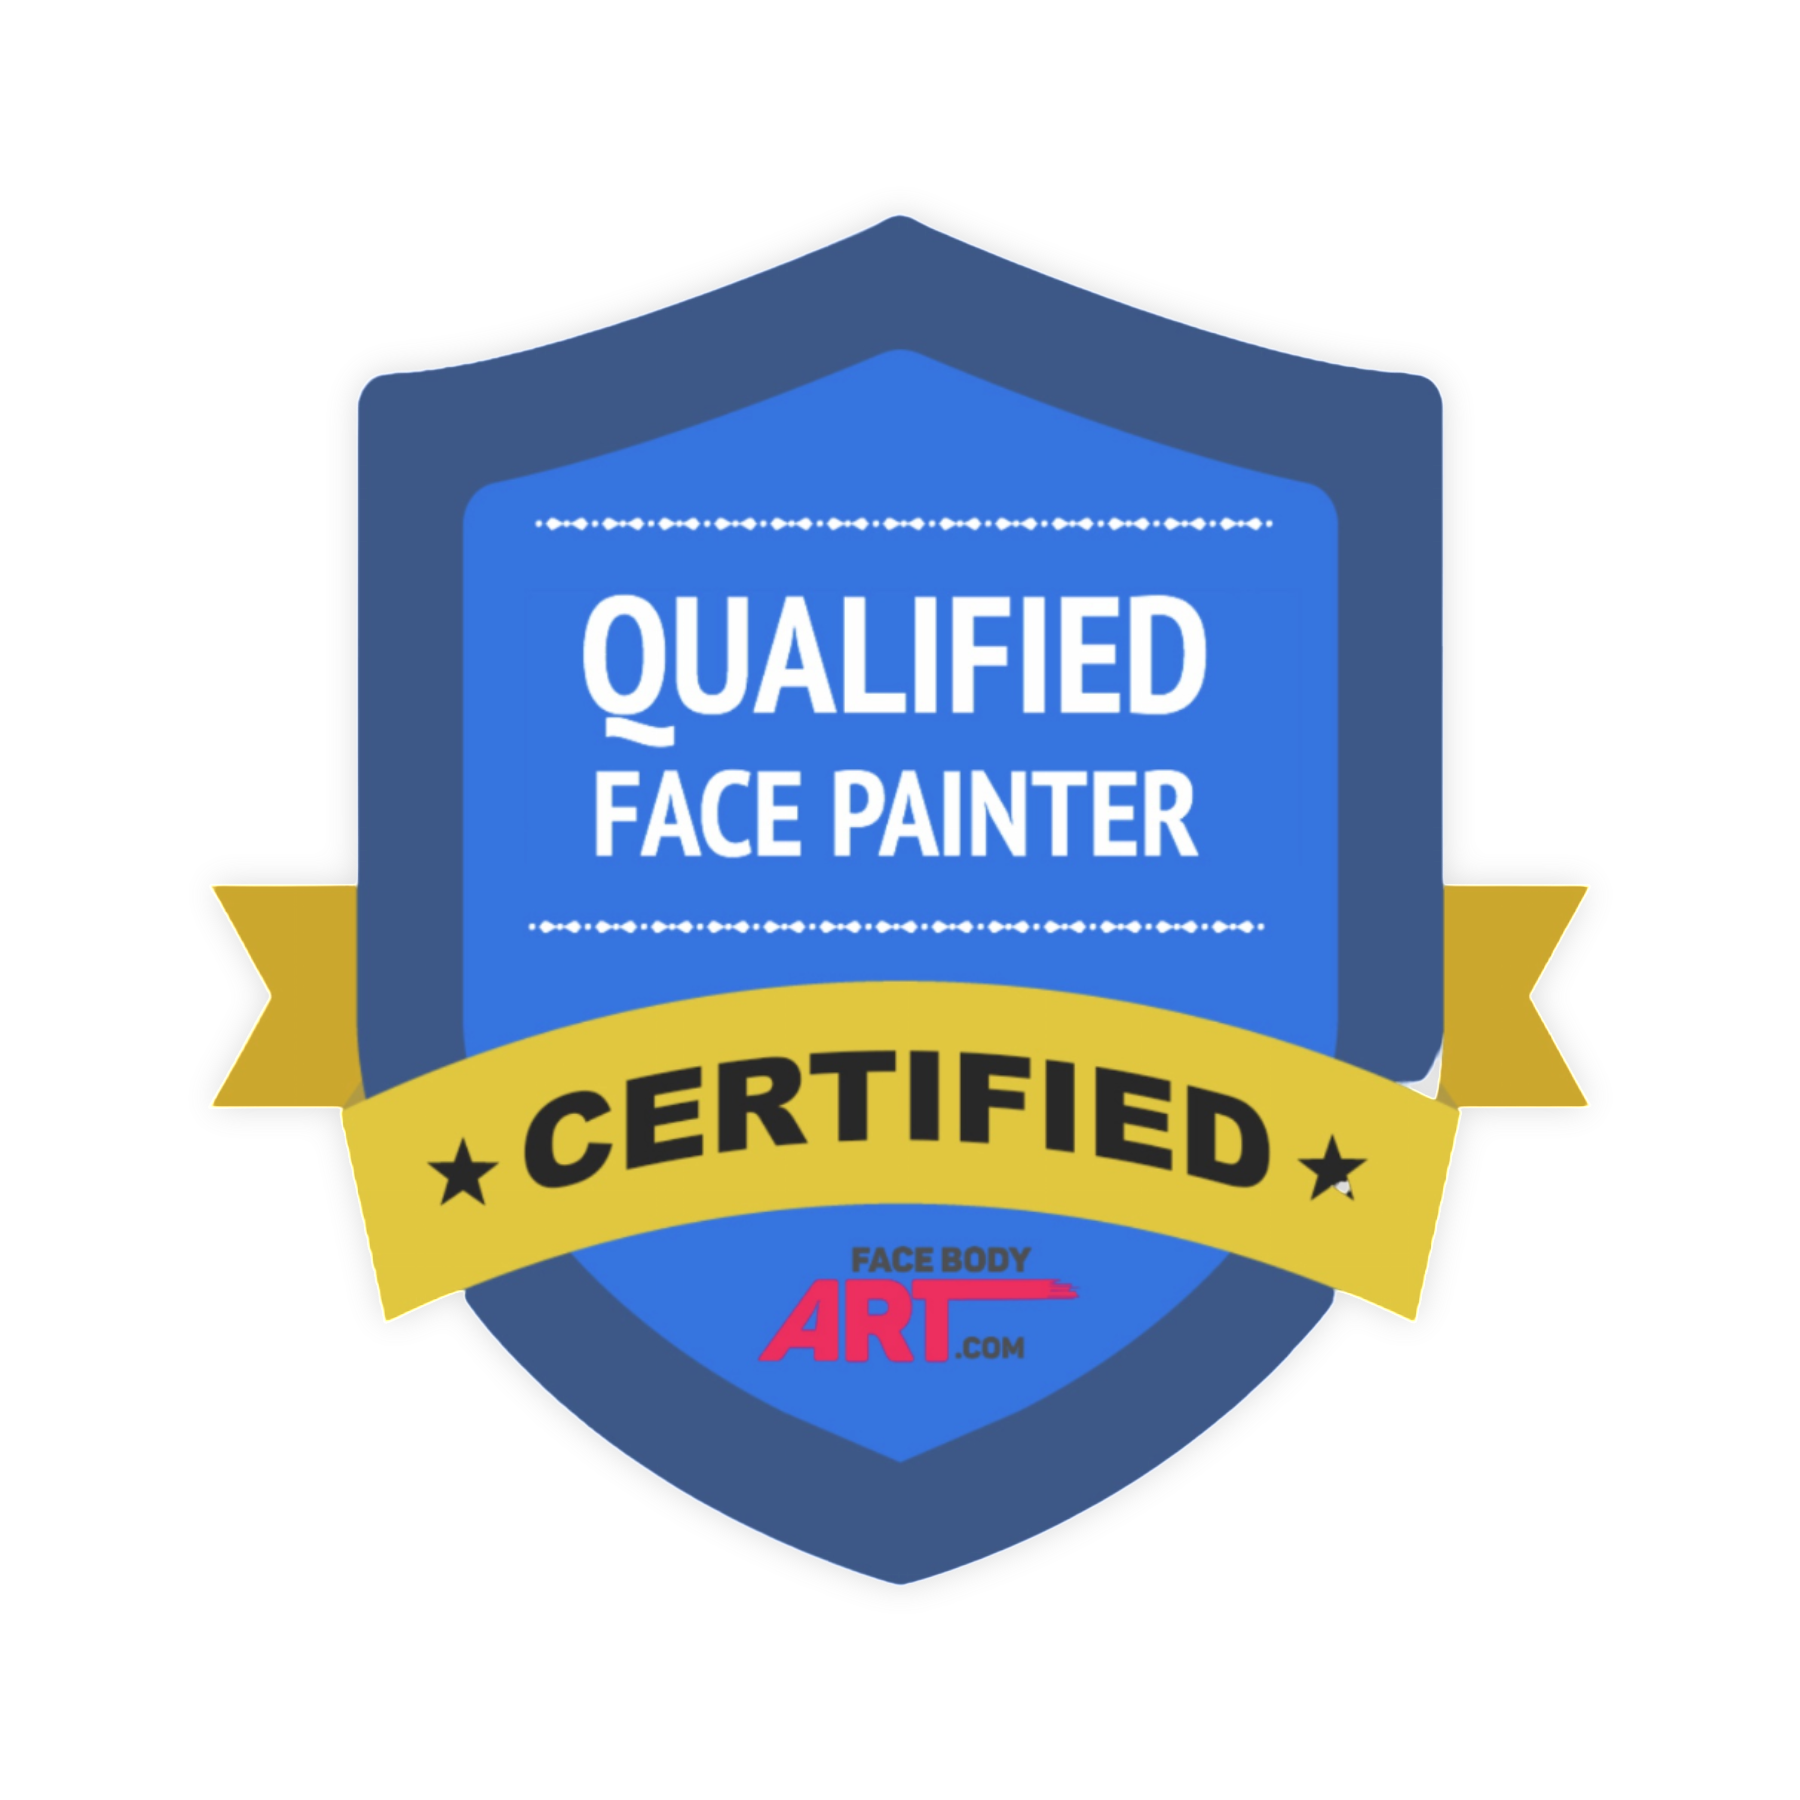 Qualified Face Painter